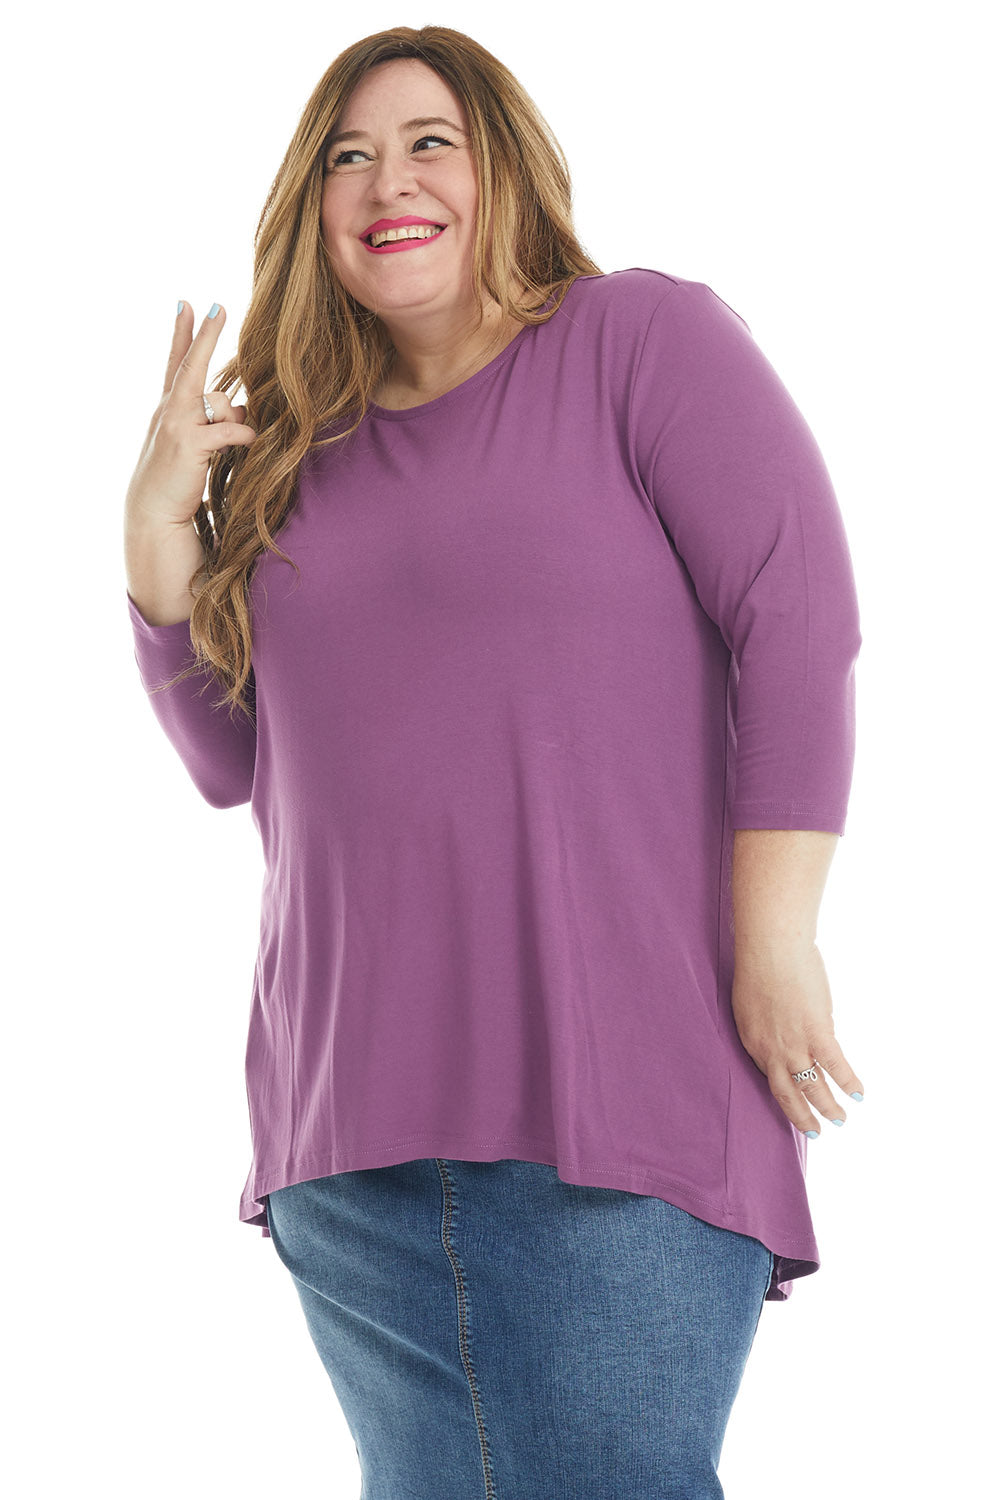 mauve basic plus size top to wear with jean skirts